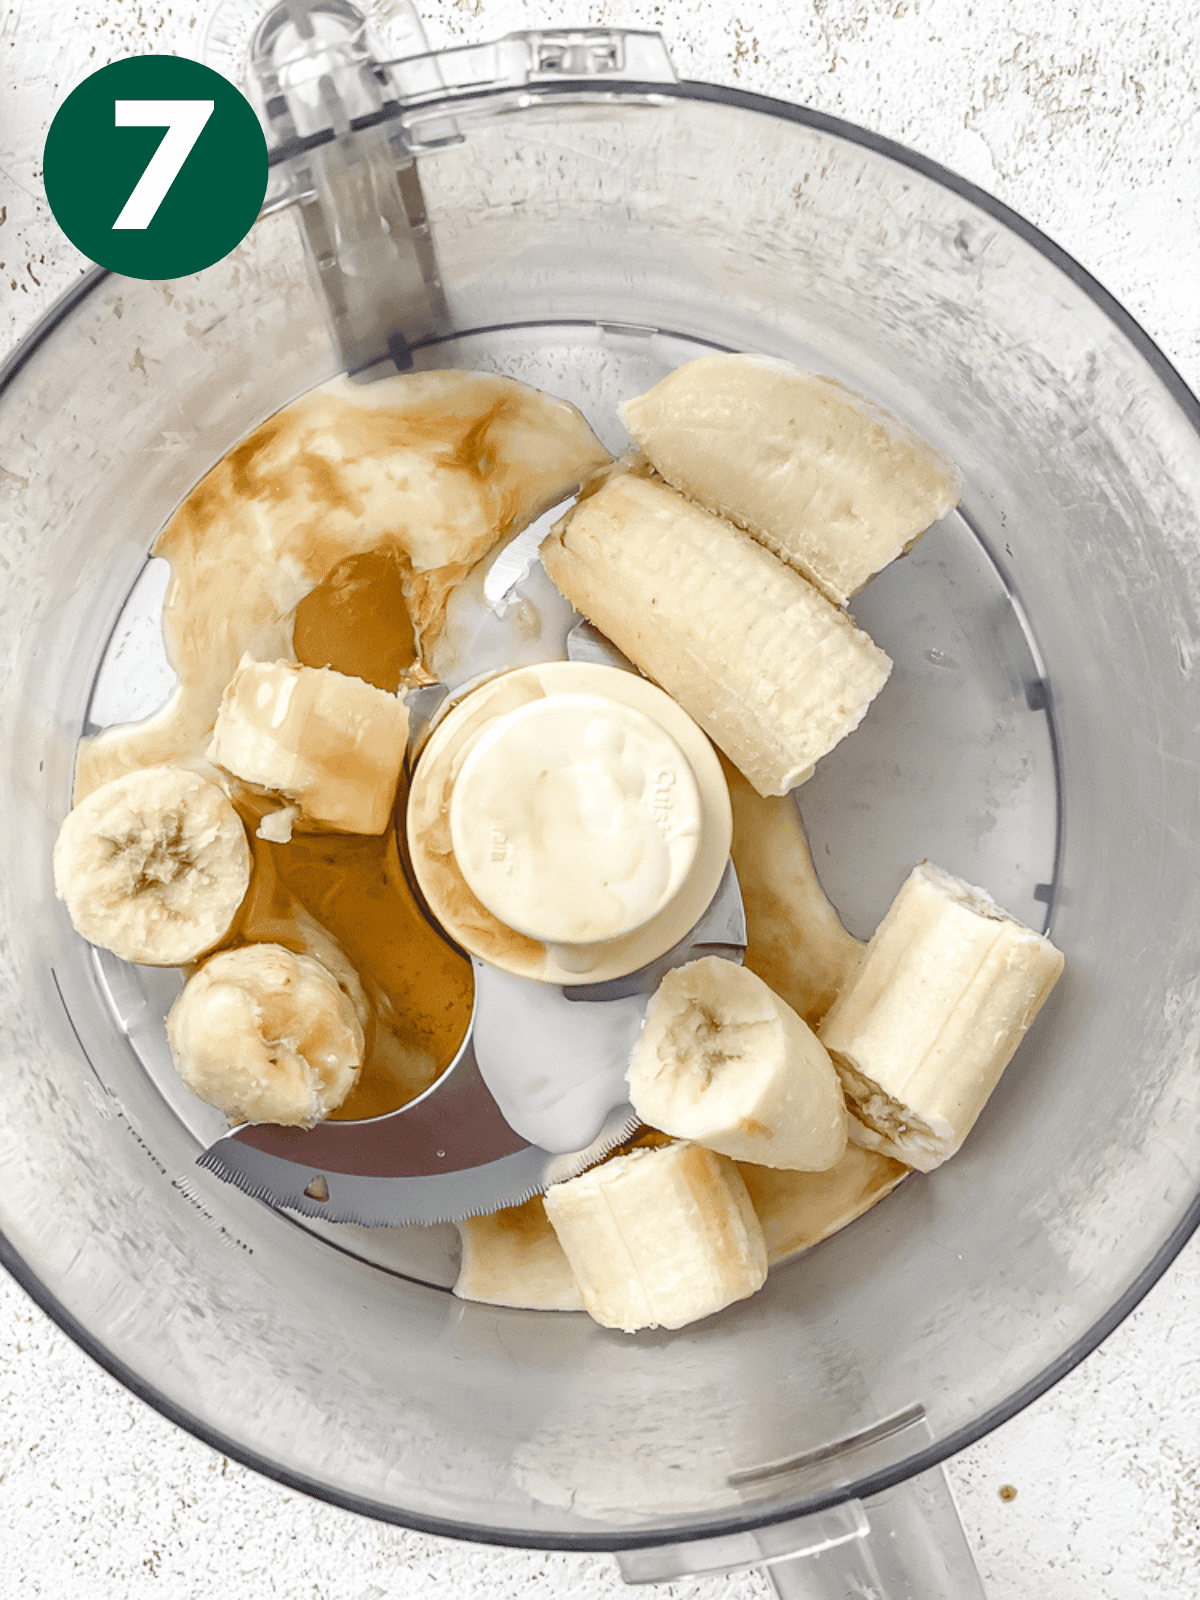 ingredients for banana ice cream in a food processor.